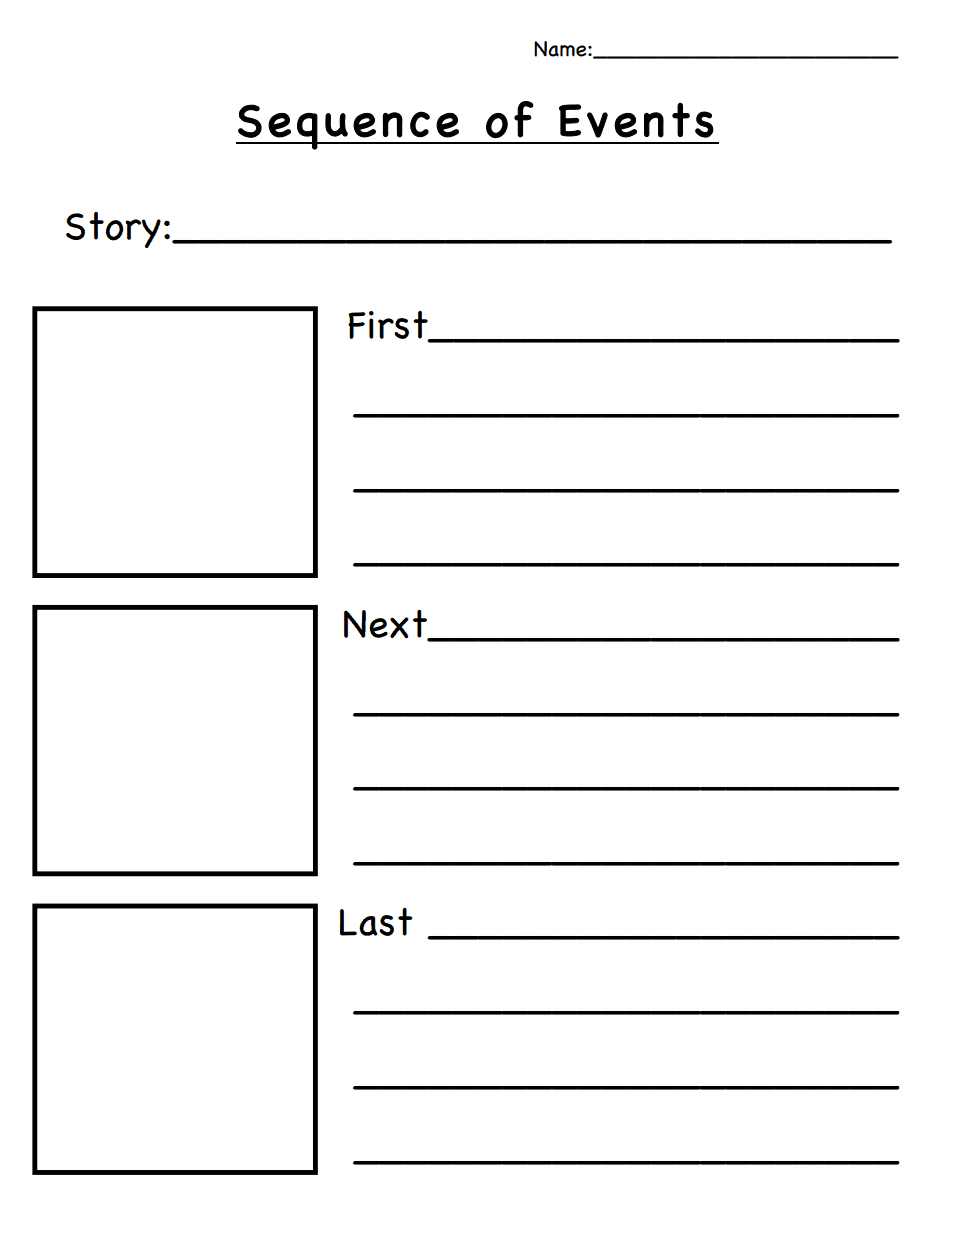 Sequence Of Events.pdf | Classroom Ideas | Sequencing Worksheets - Free Printable Sequence Of Events Graphic Organizer